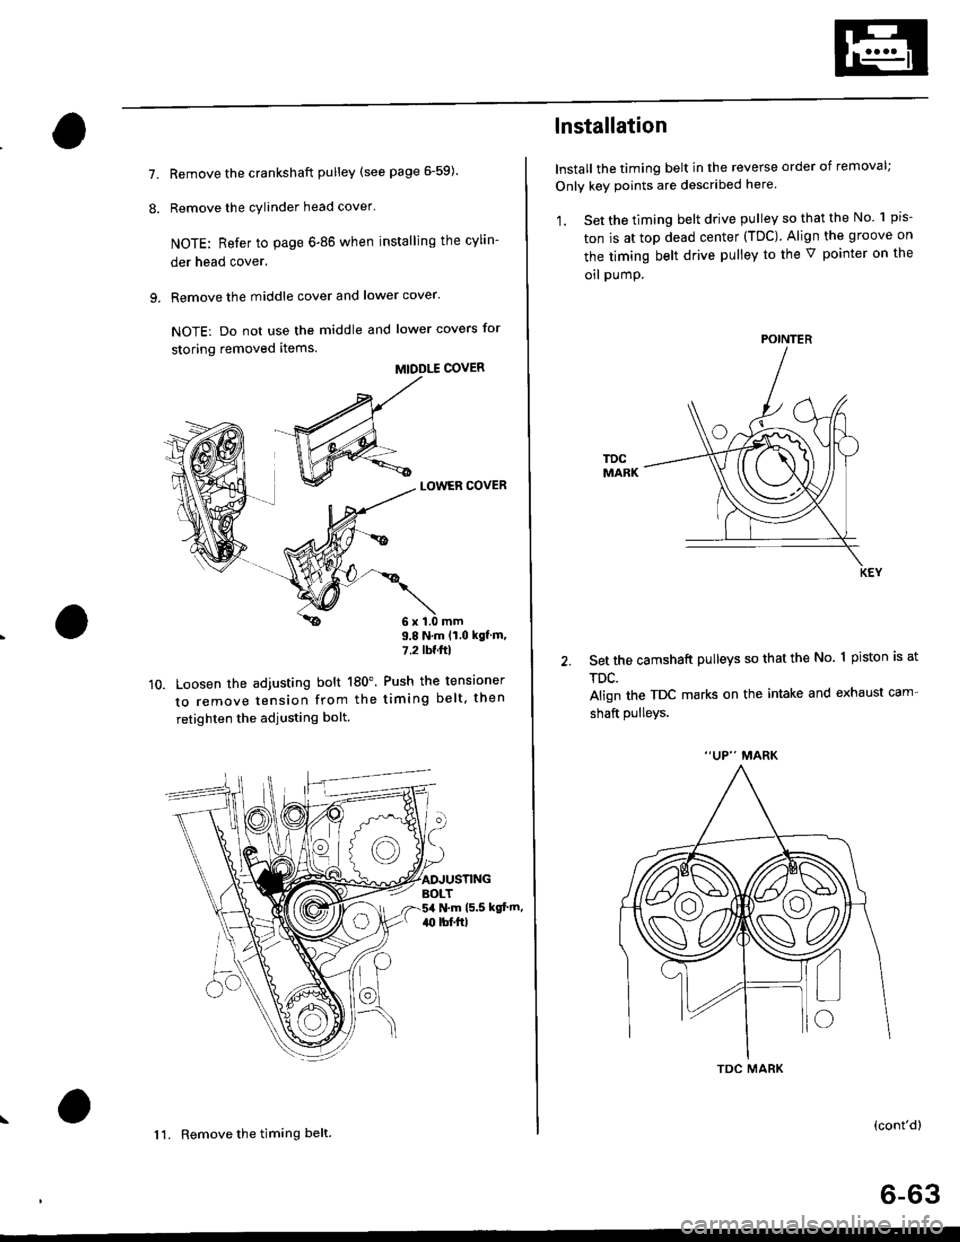 HONDA CIVIC 1999 6.G Owners Manual 7.
8.
Remove the crankshaft pulley (see page 6-59).
Remove the cylinder head cover
NOTE: Refer to page 6-86 when installing the cylin-
der head cover.
Remove the middle cover and lower cover.
NOTE: D